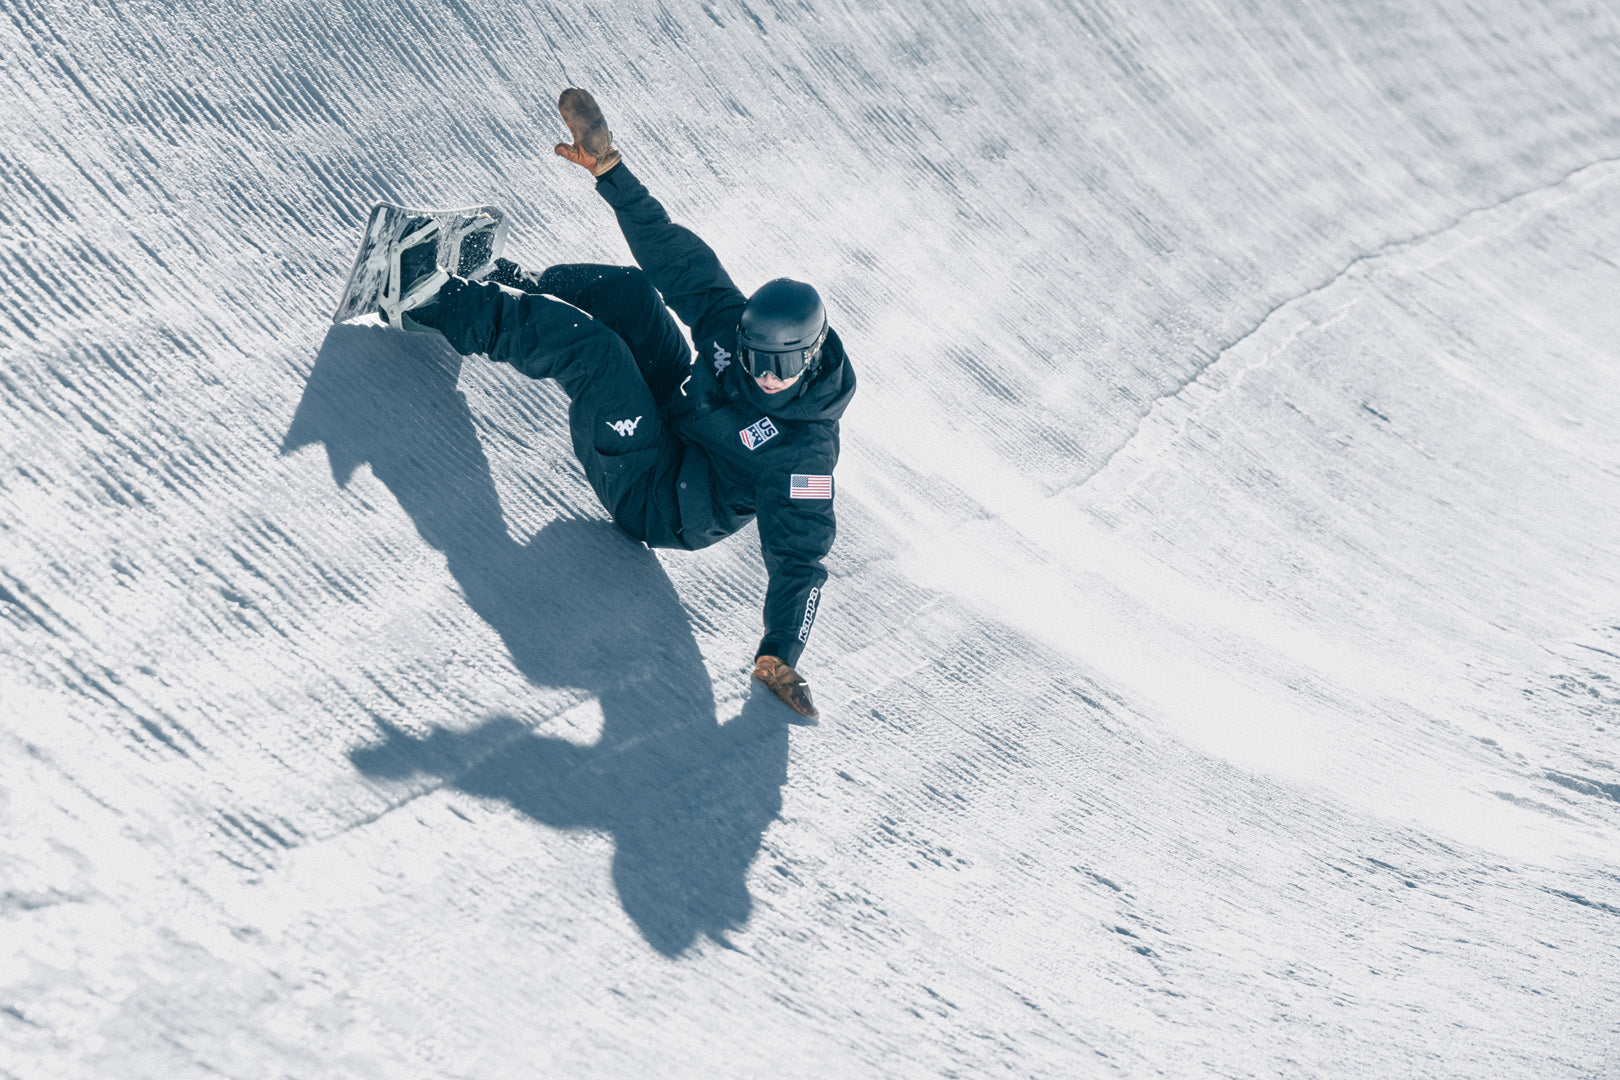 Male US snowboard athlete carving half pipe with his hand touching the snow in full Kappa uniform.